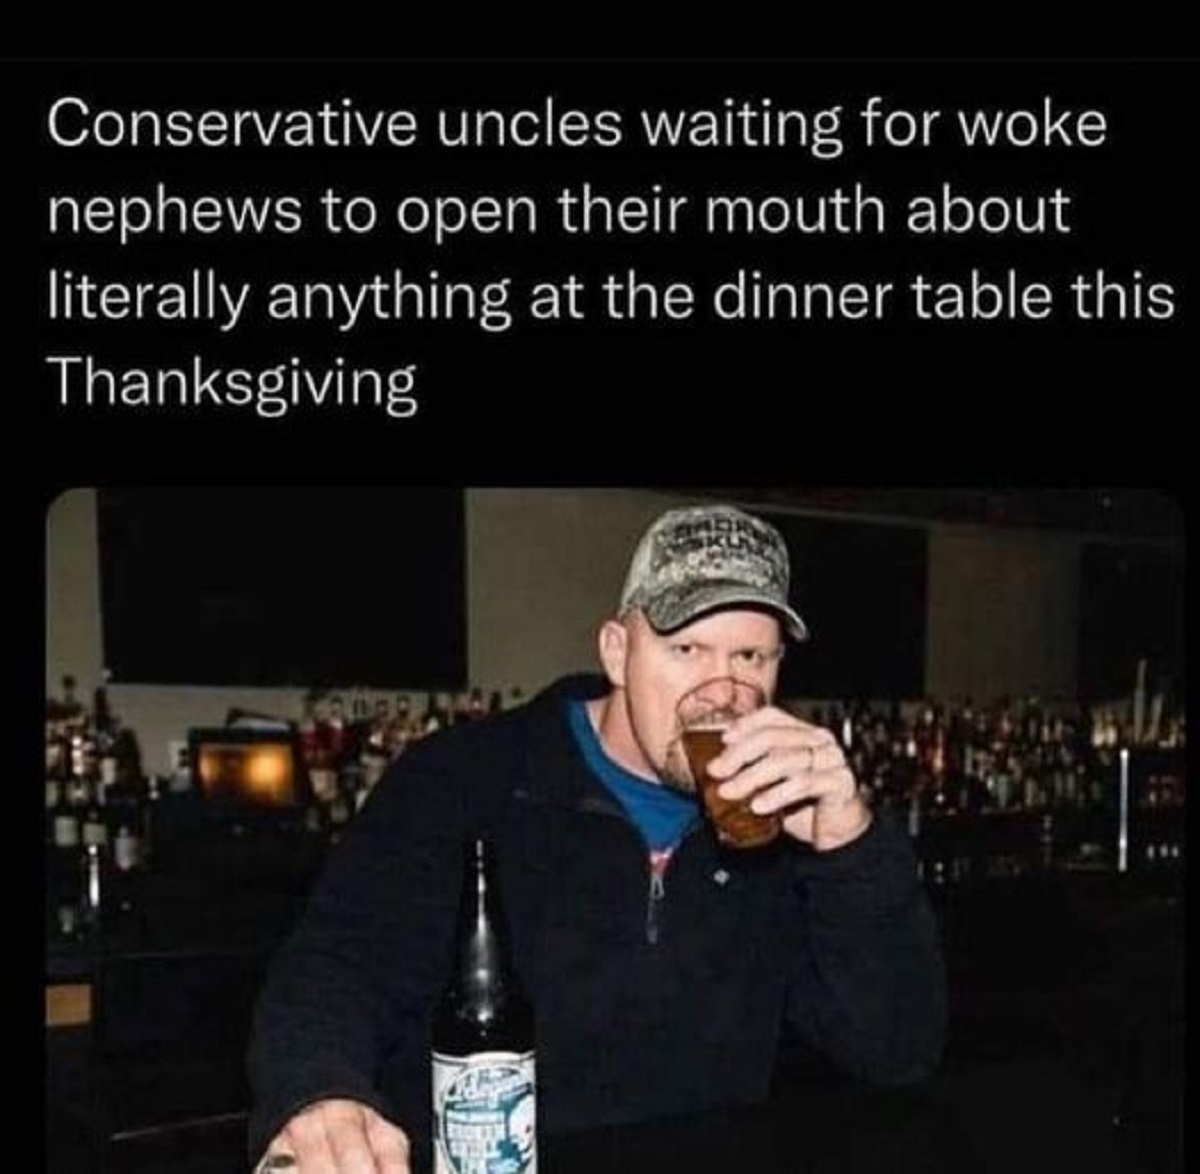 photo caption - Conservative uncles waiting for woke nephews to open their mouth about literally anything at the dinner table this Thanksgiving 6089 will